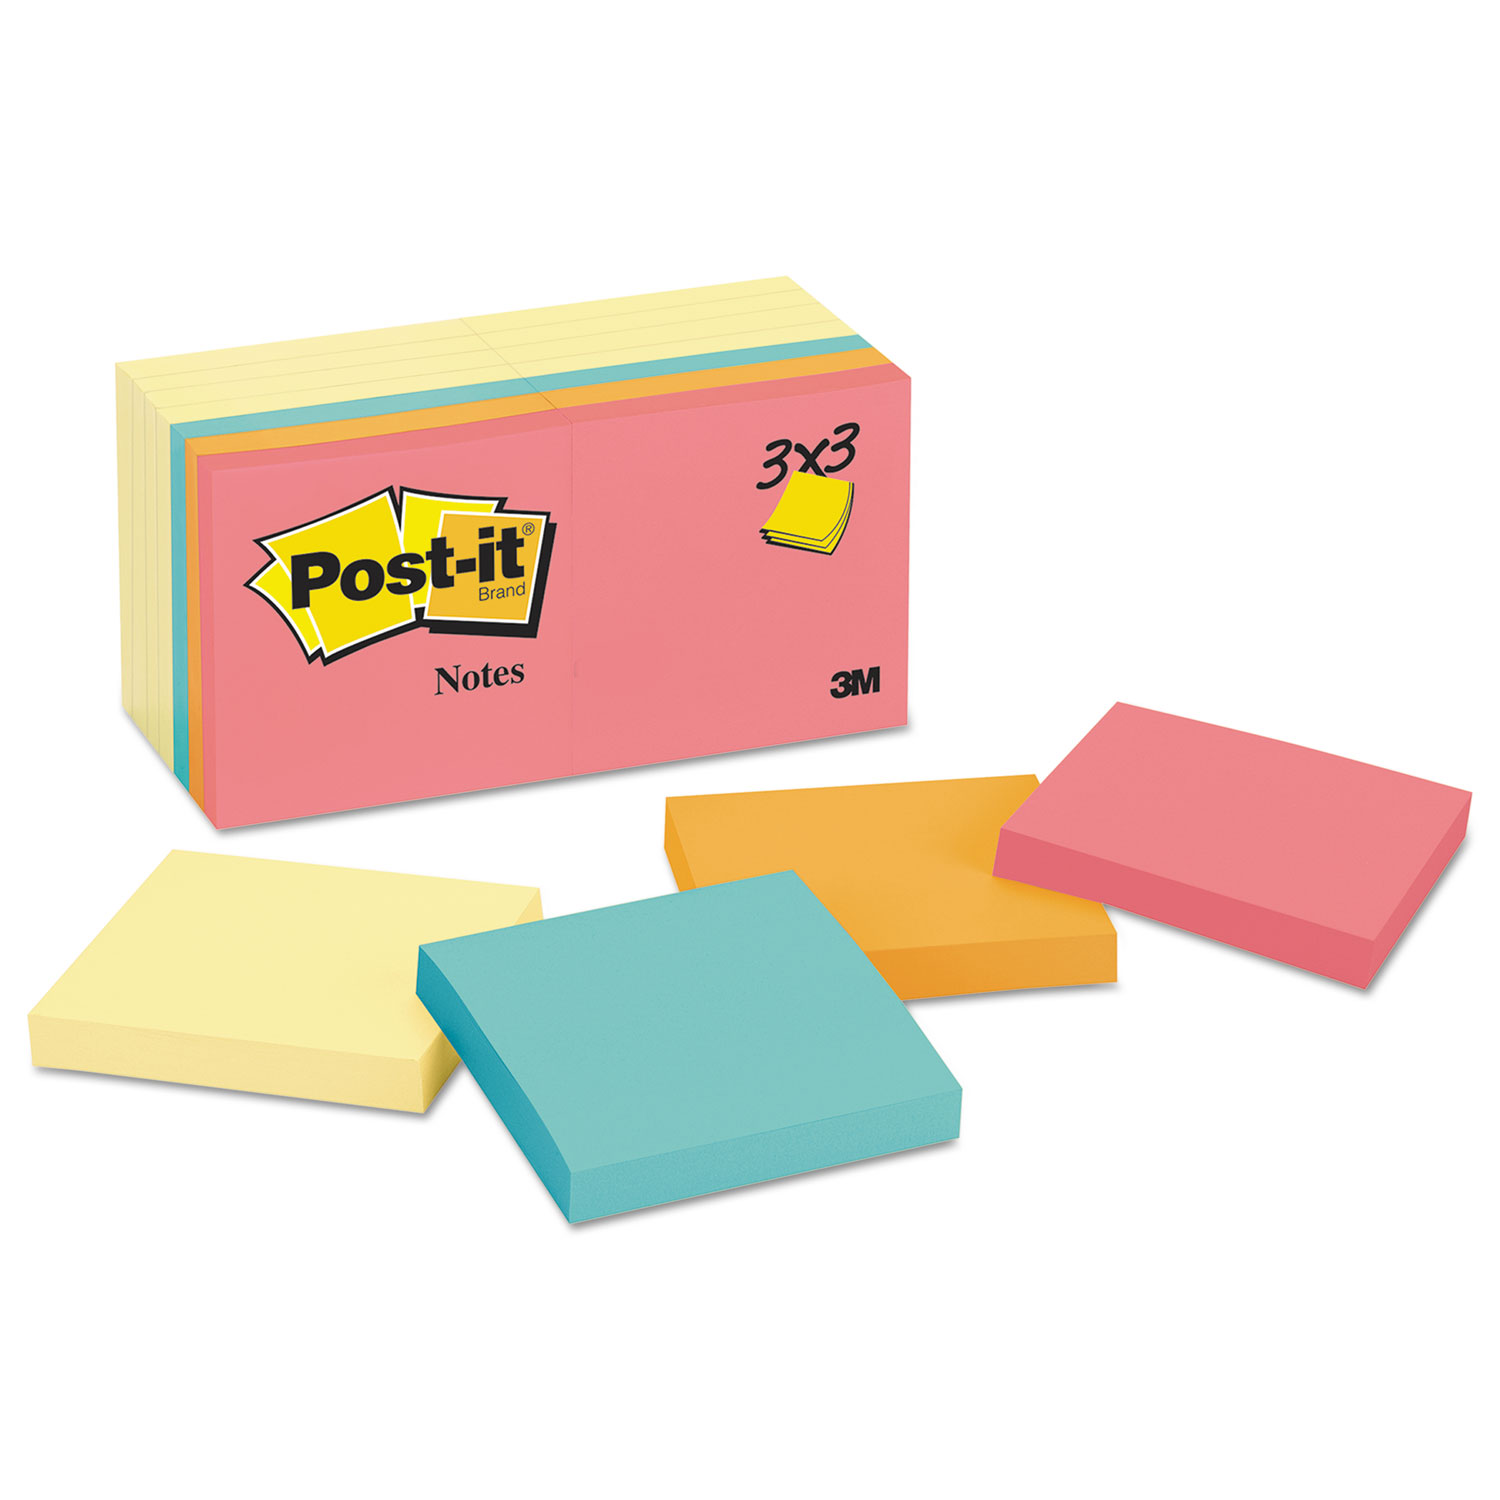 3M Post-it Recycled Notes, 4 x 6, 100 Sheets, Assorted Pastel Colors - 5 pack